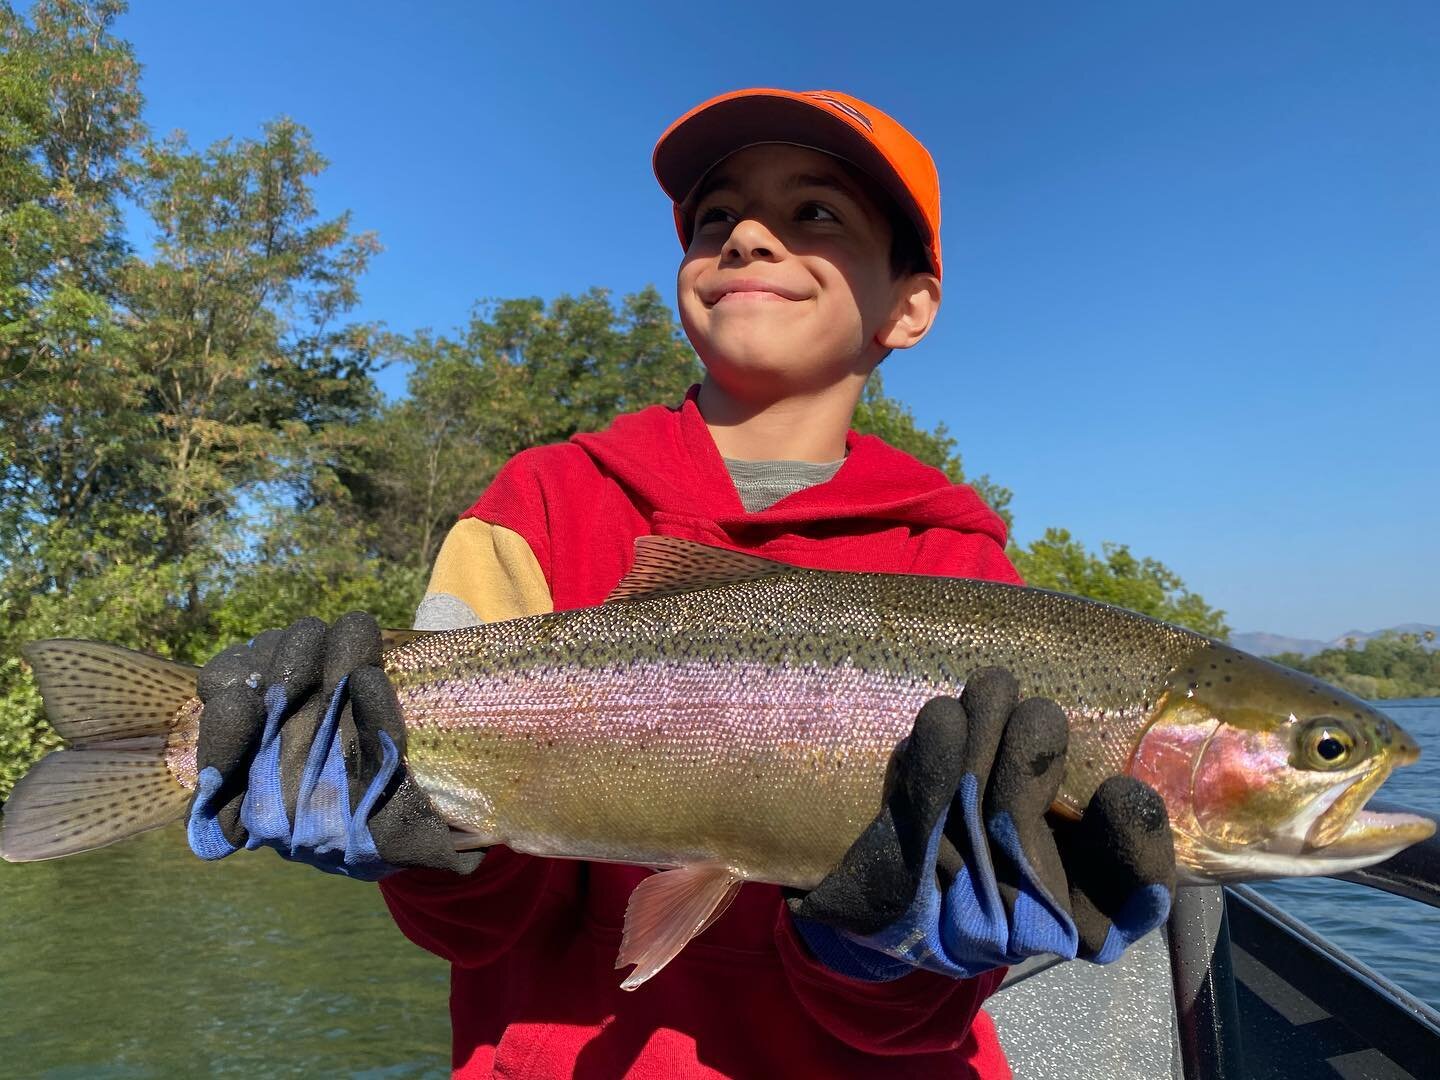 #jtfishingredding good day on the Sacramento River fishing with Armen and his grandson, they had a action packed day of fishing. @jeffgoodwinfishingteam 
.
.
.
@pautzke_bait @bradskillerfishinggear #reddingcalifornia #sacramentoriver #fishingcharter 